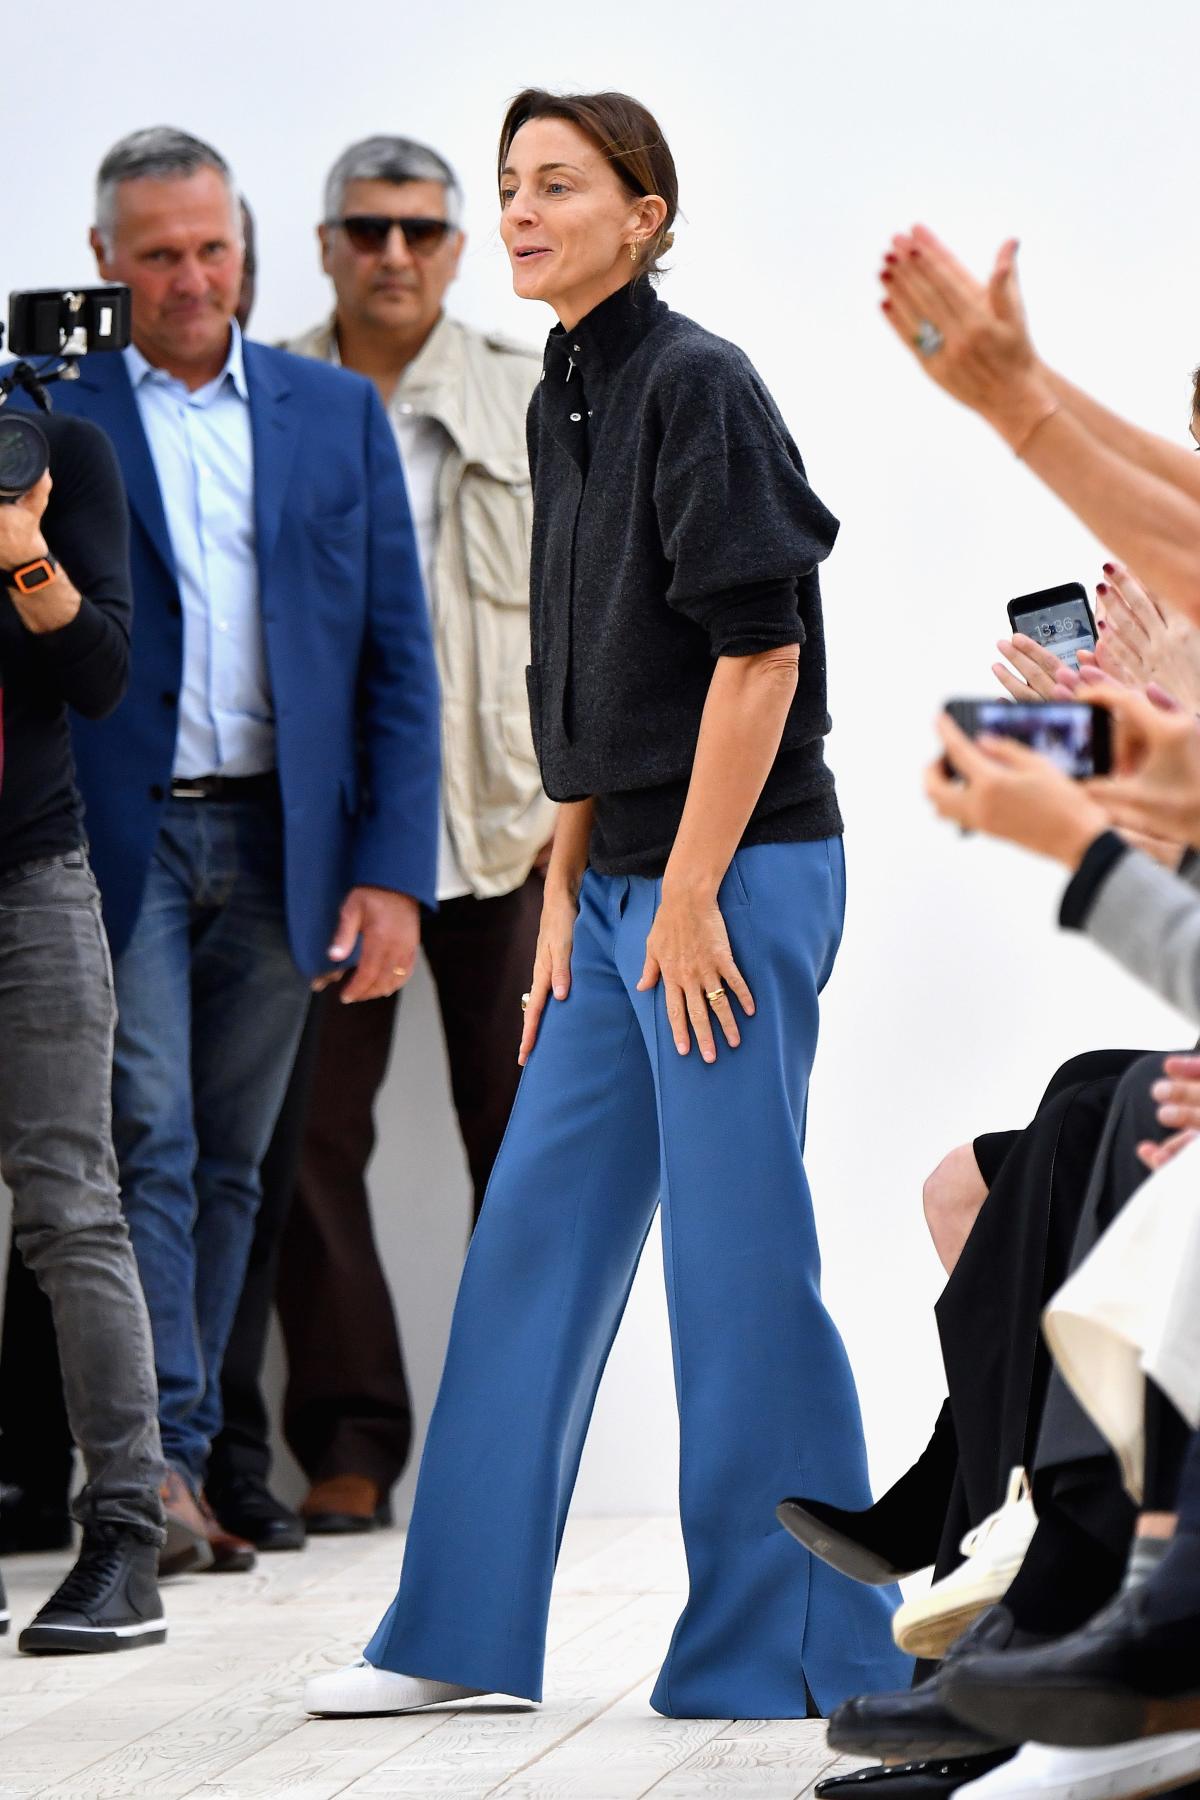 Former Céline creative director Phoebe Philo to launch her own brand